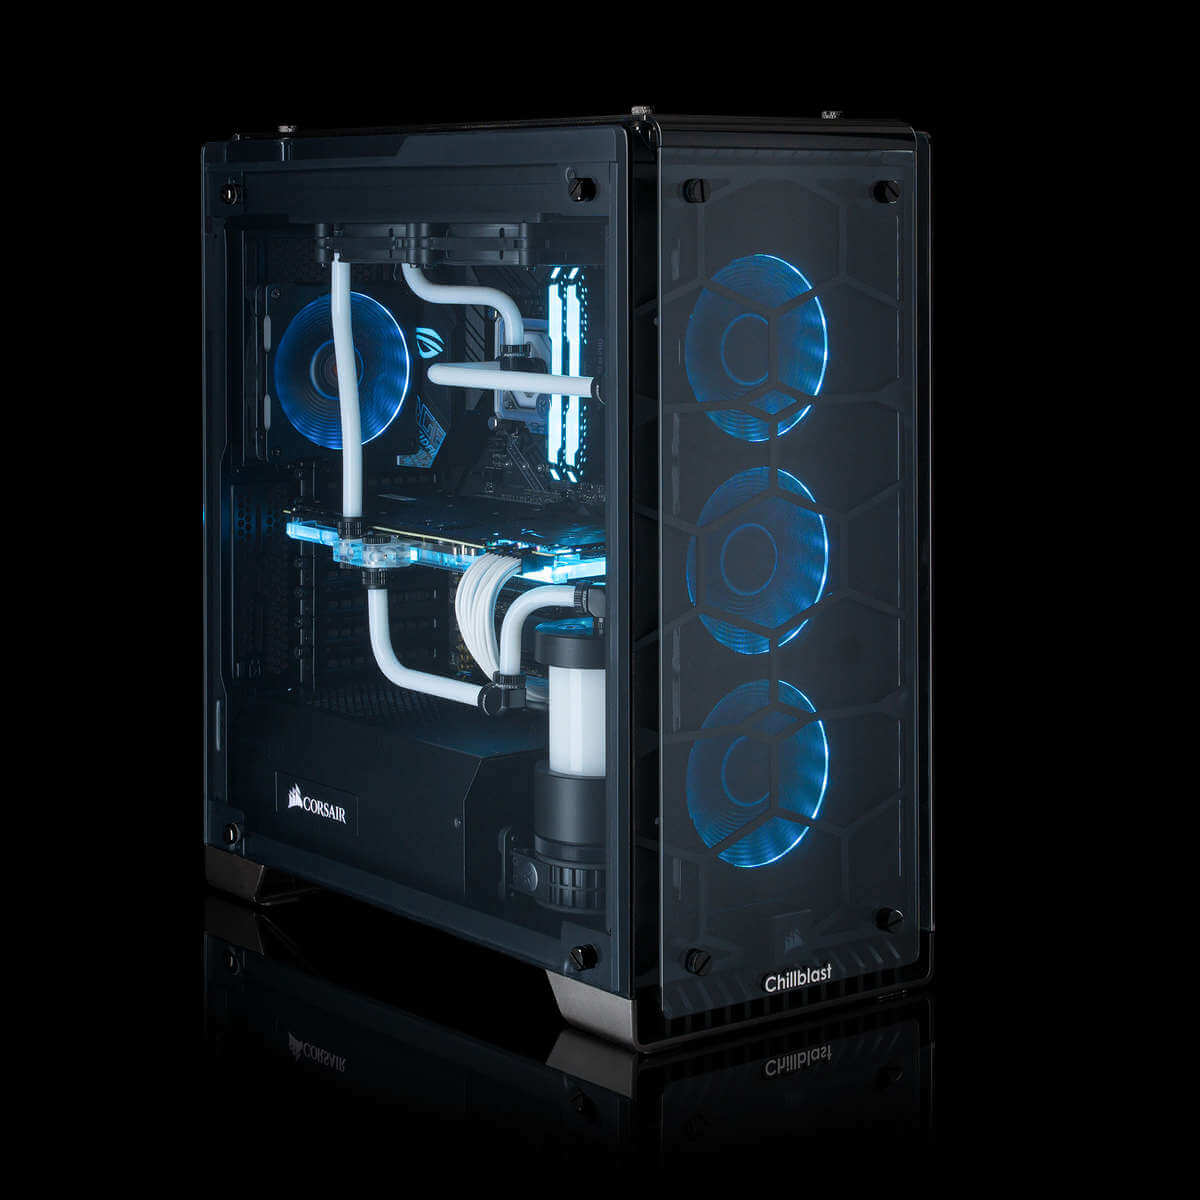 Image of the watercooled Chillblast Fusion Hailstorm X RGB Gaming PC against a dark background